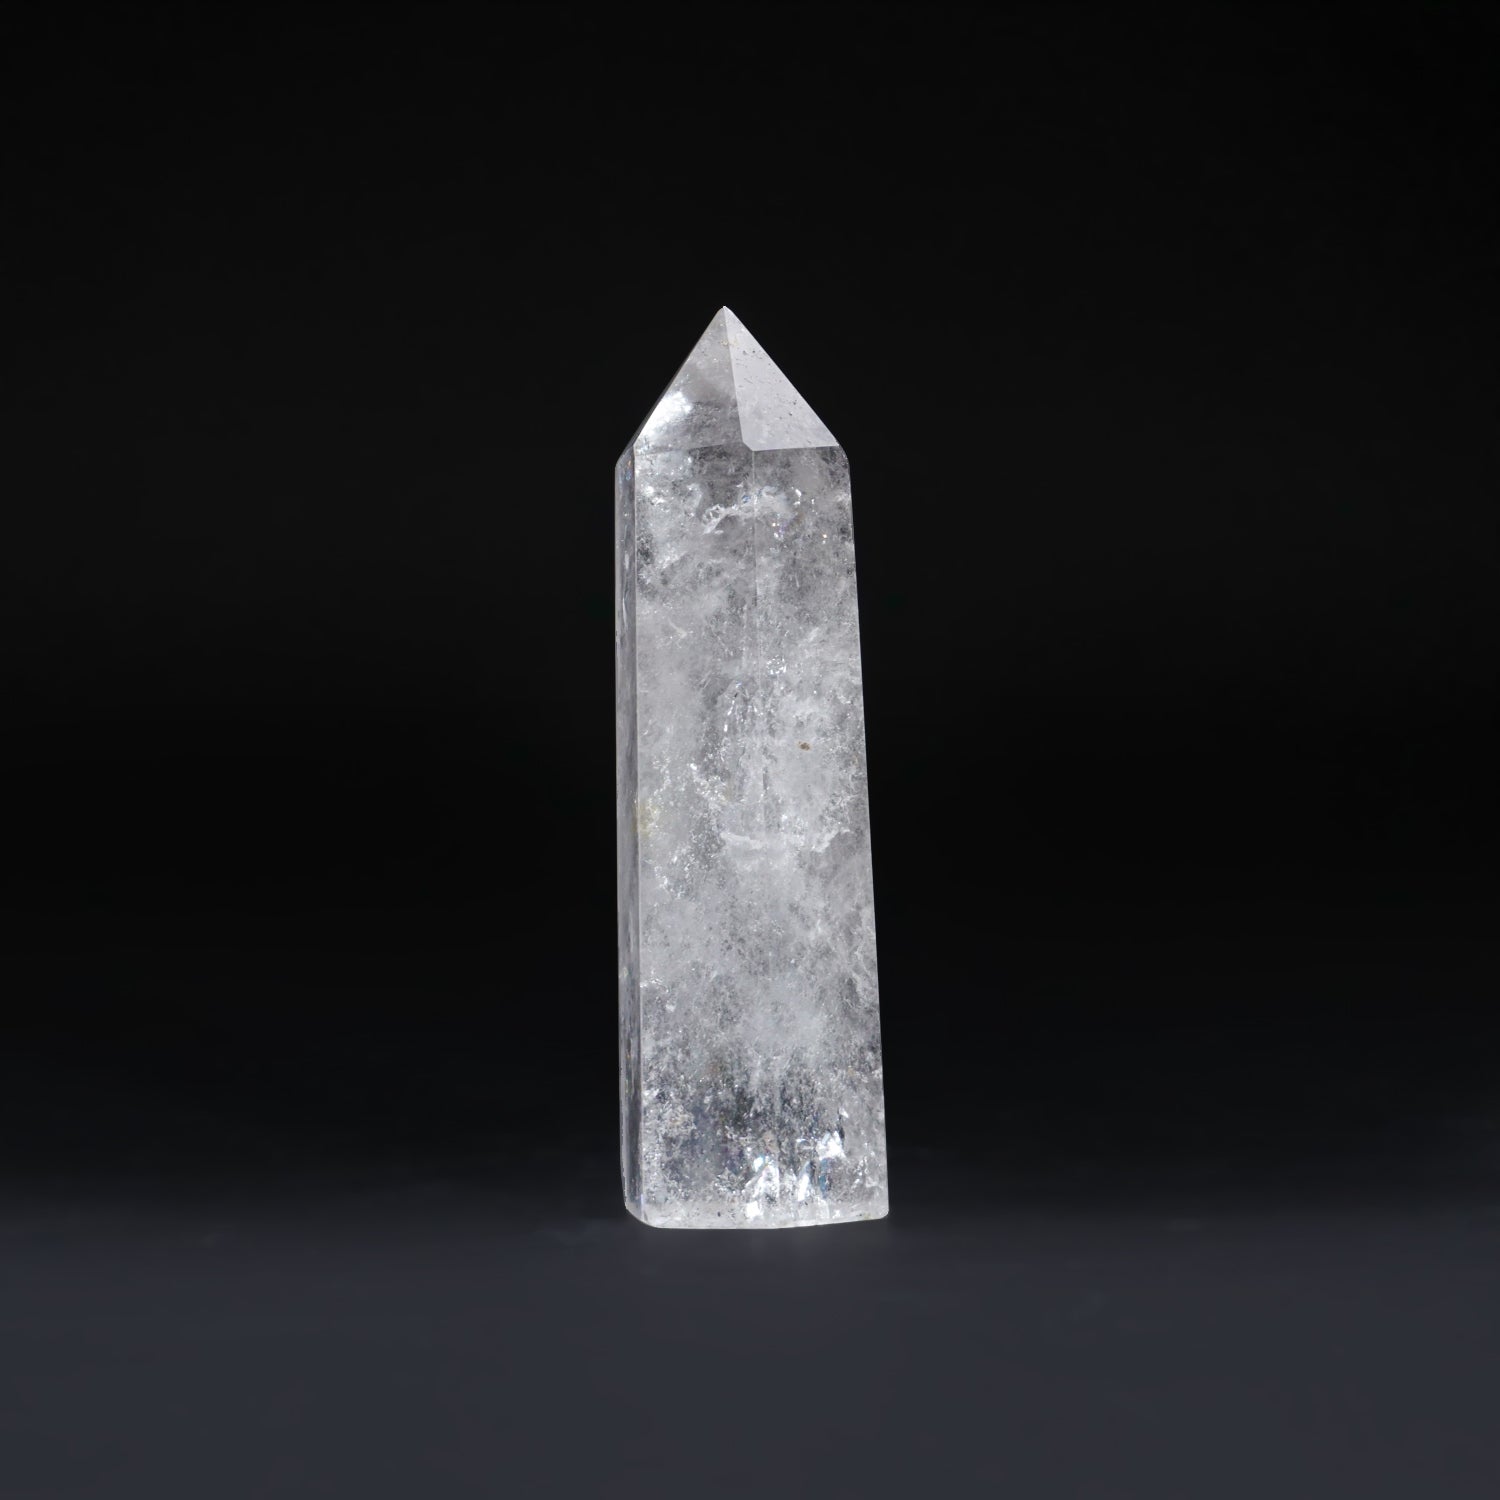 Genuine Polished Clear Quartz Point From Brazil (241 grams)